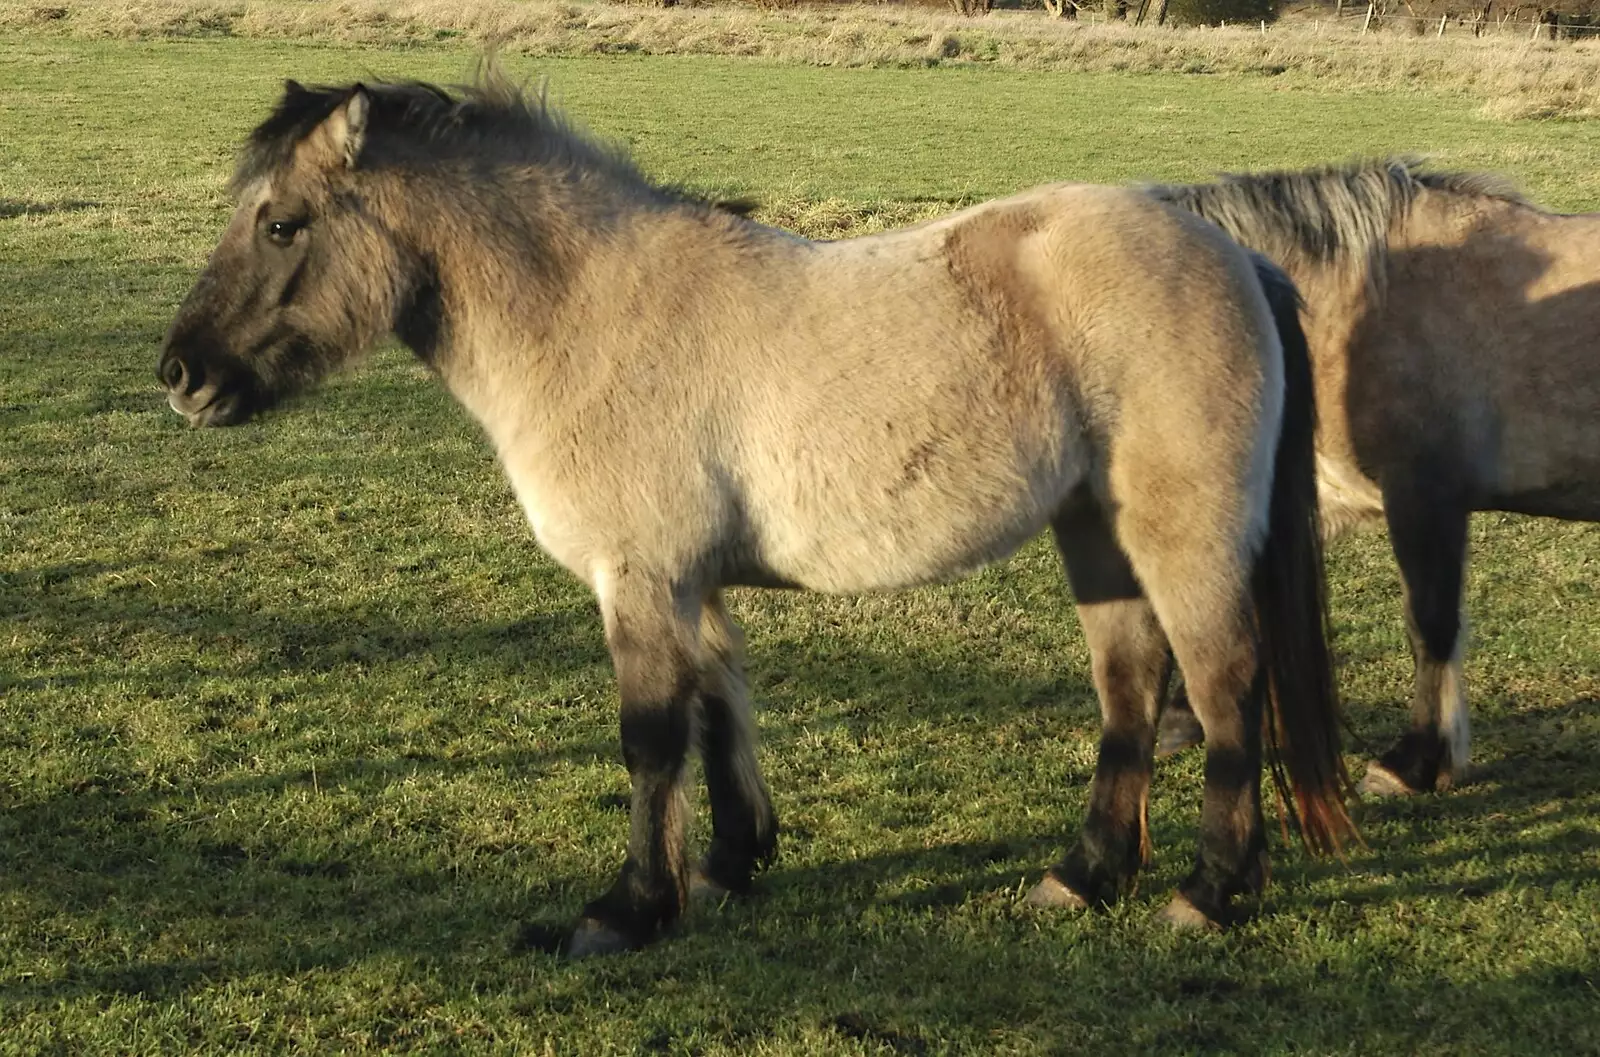 Some shaggy ponies, from Boxing Day Rambles, Hoxne and Oakley, Suffolk - 26th December 2004